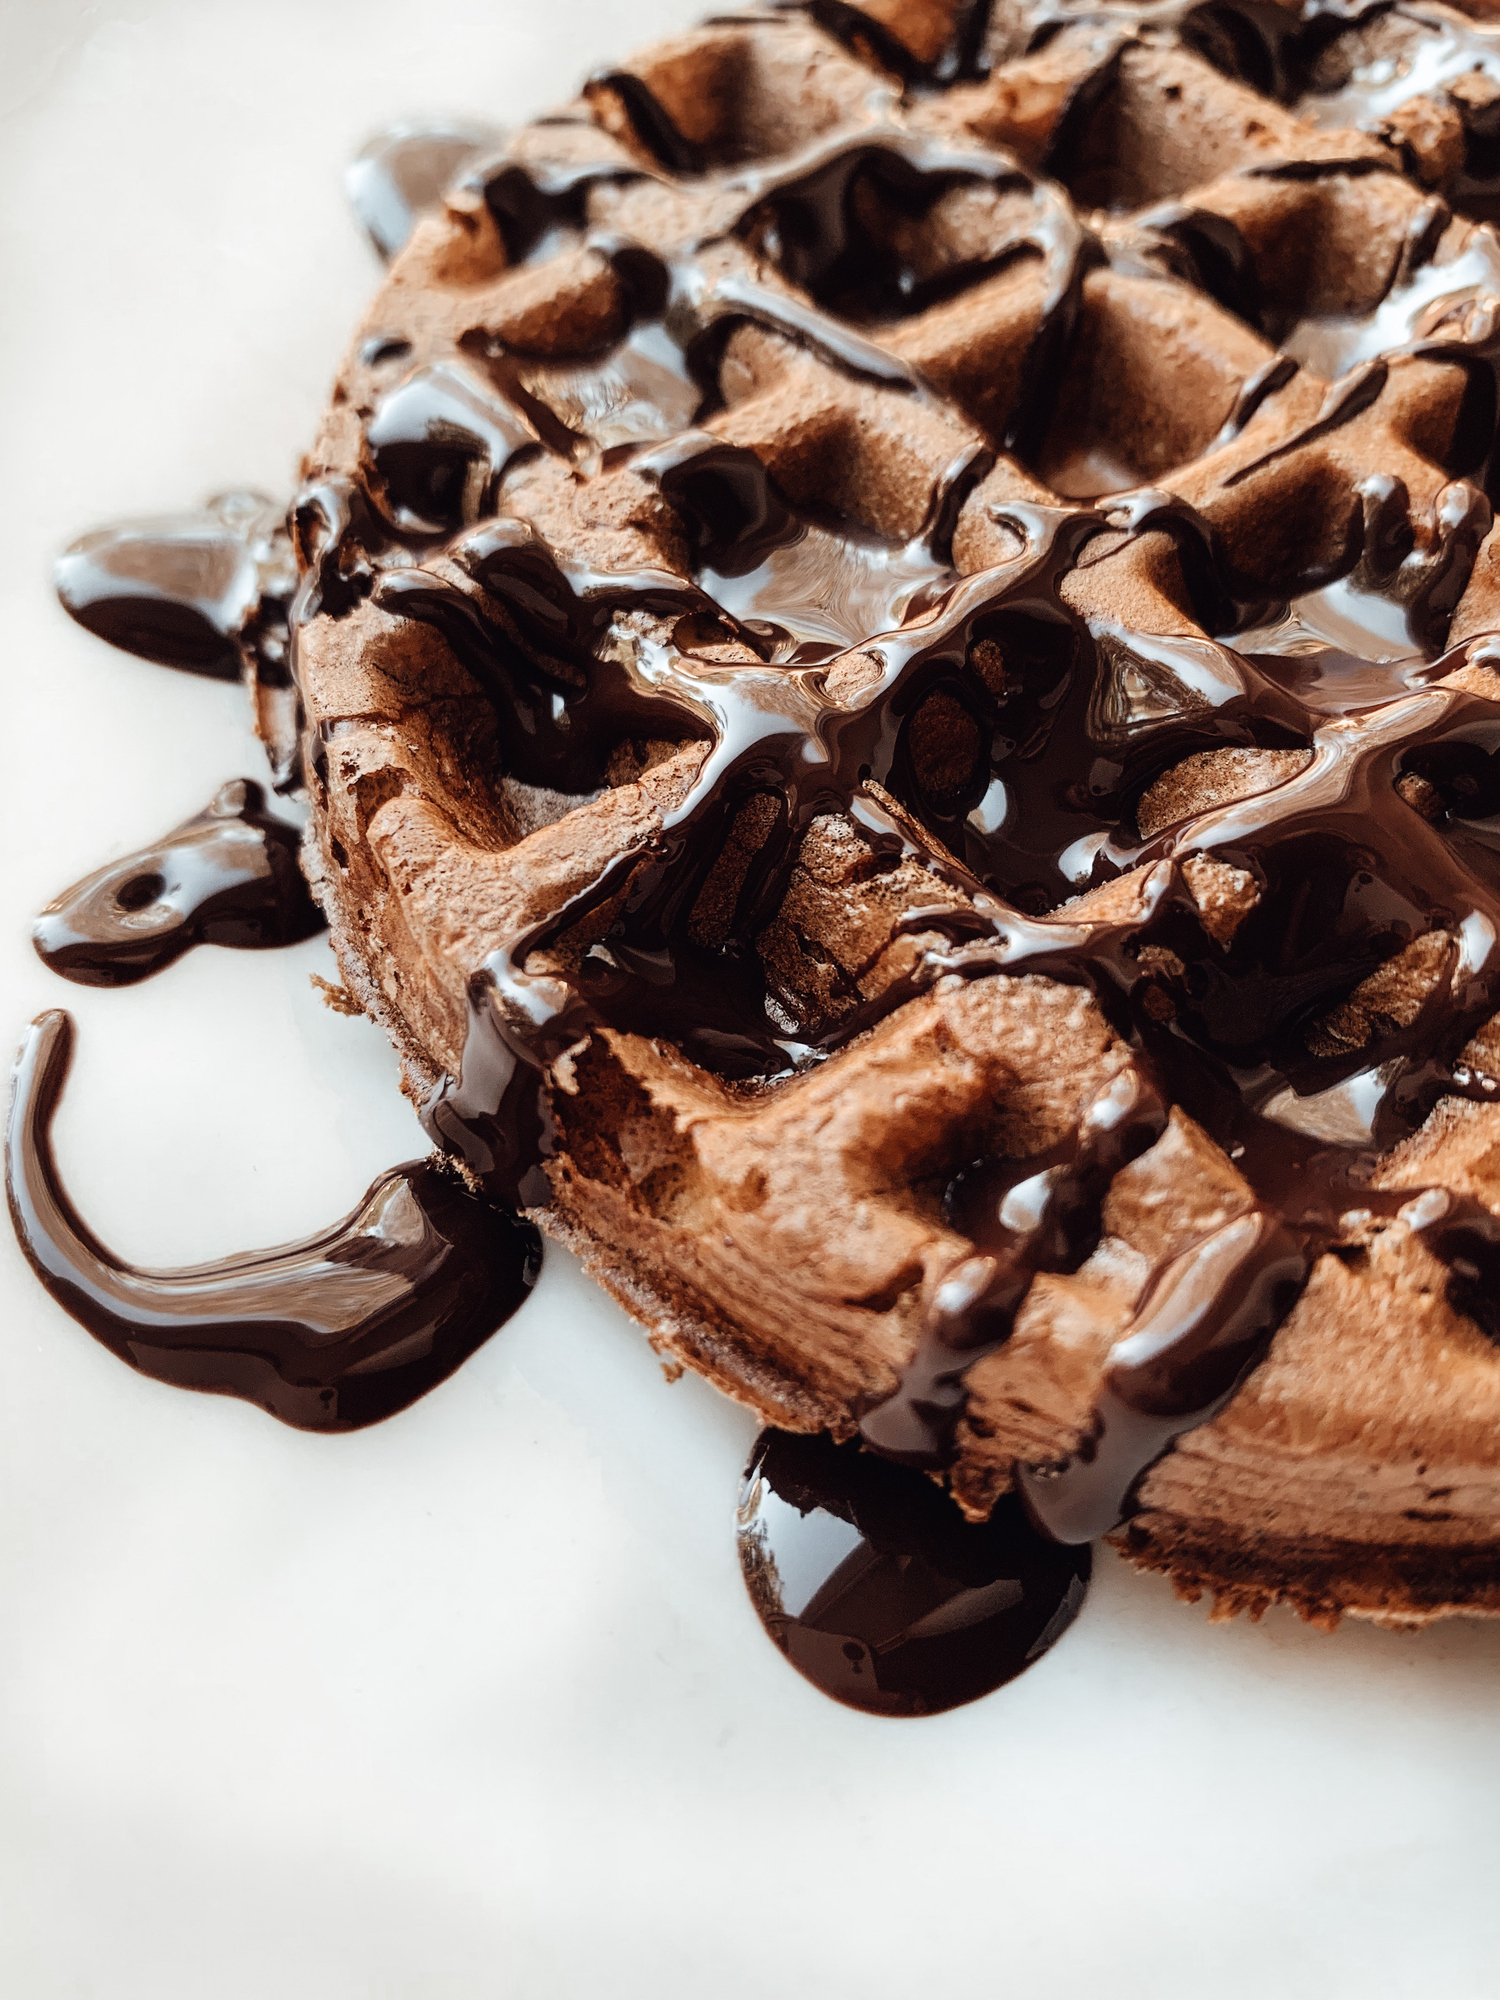 A chocolate-covered waffle on a plate